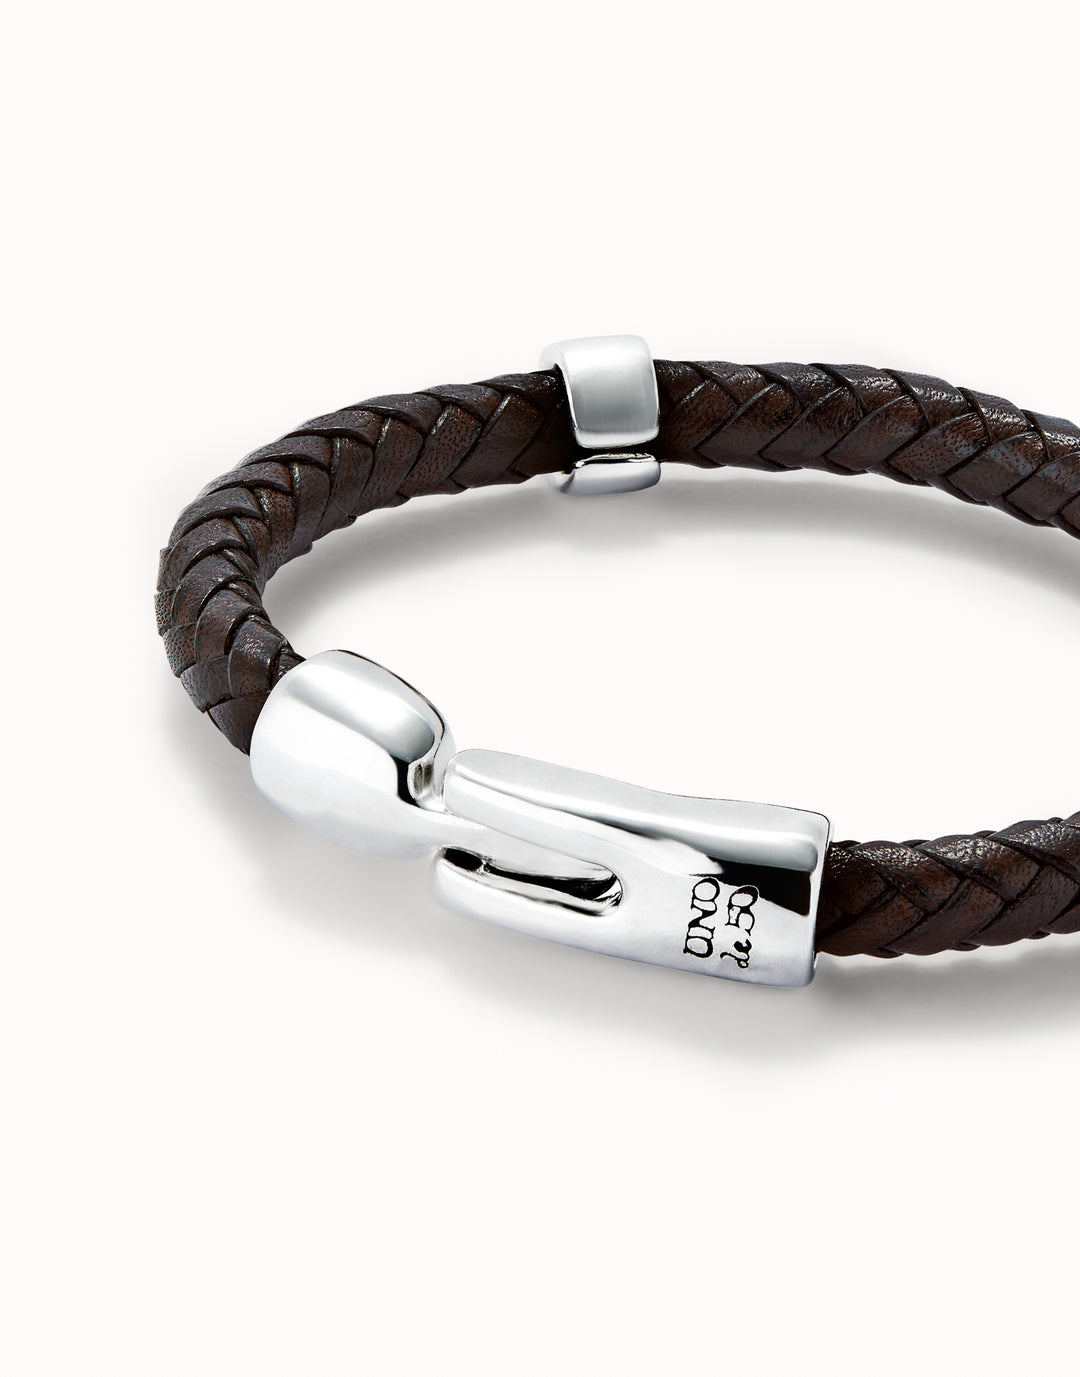 BRAIDED LEATHER BROWN BRACELET WITH RONDELLES-SILVER